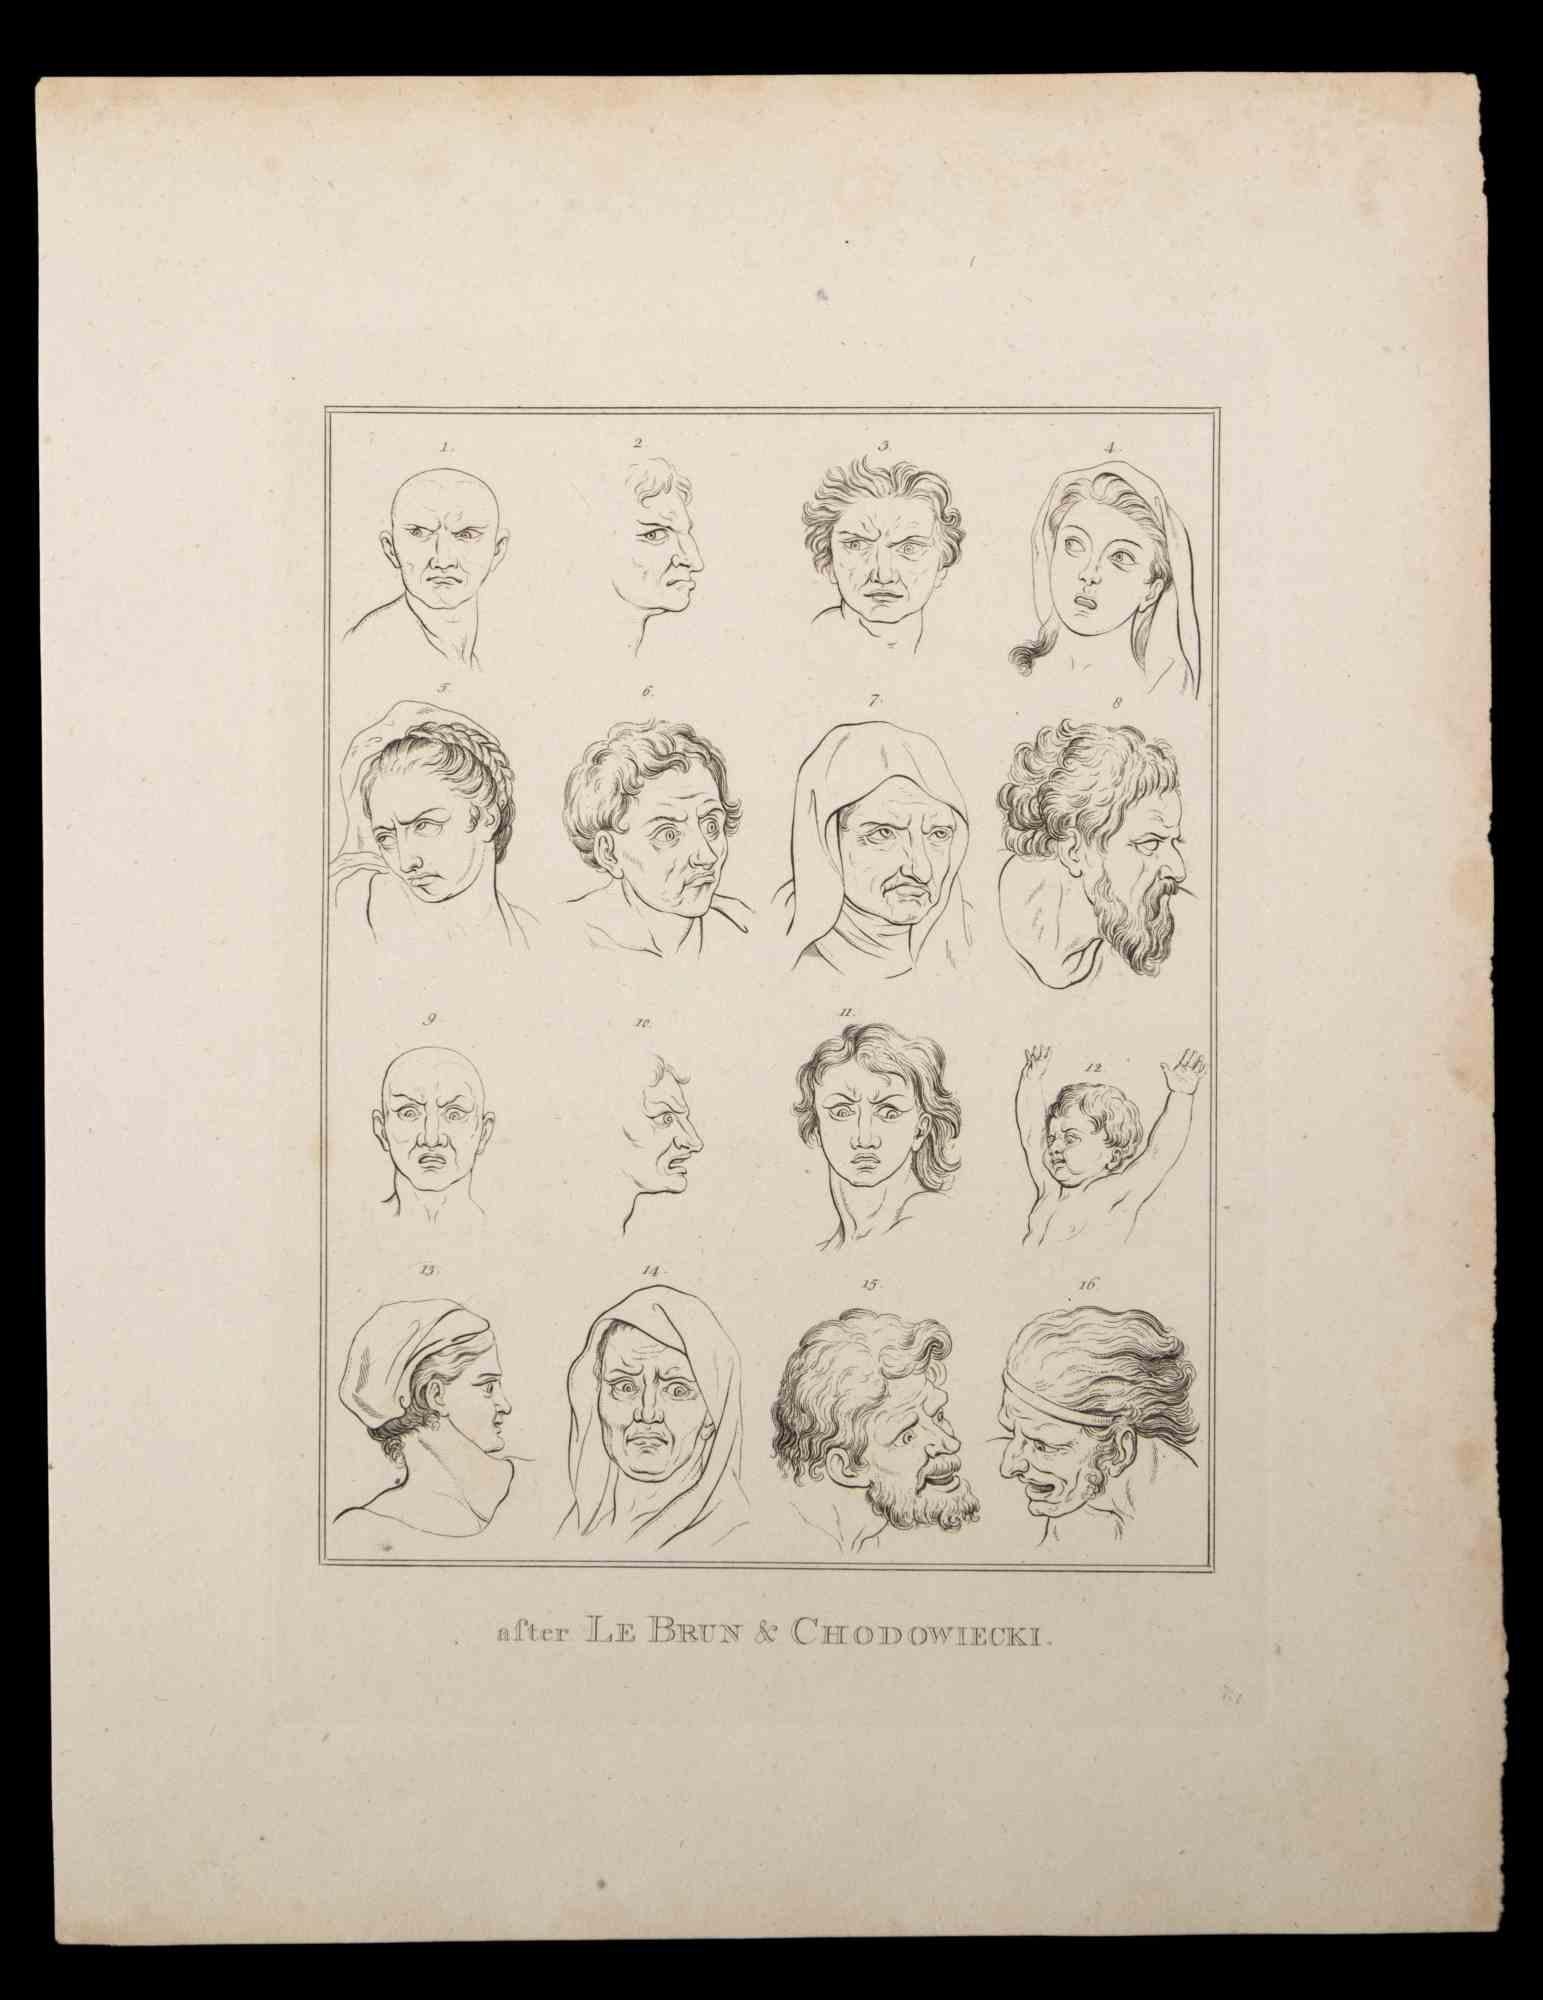 Portrait of men and women is an original etching artwork realized by Thomas Holloway after Lebrun and Chodowiecki, for Johann Caspar Lavater's "Essays on Physiognomy, Designed to Promote the Knowledge and the Love of Mankind", London, Bensley, 1810.